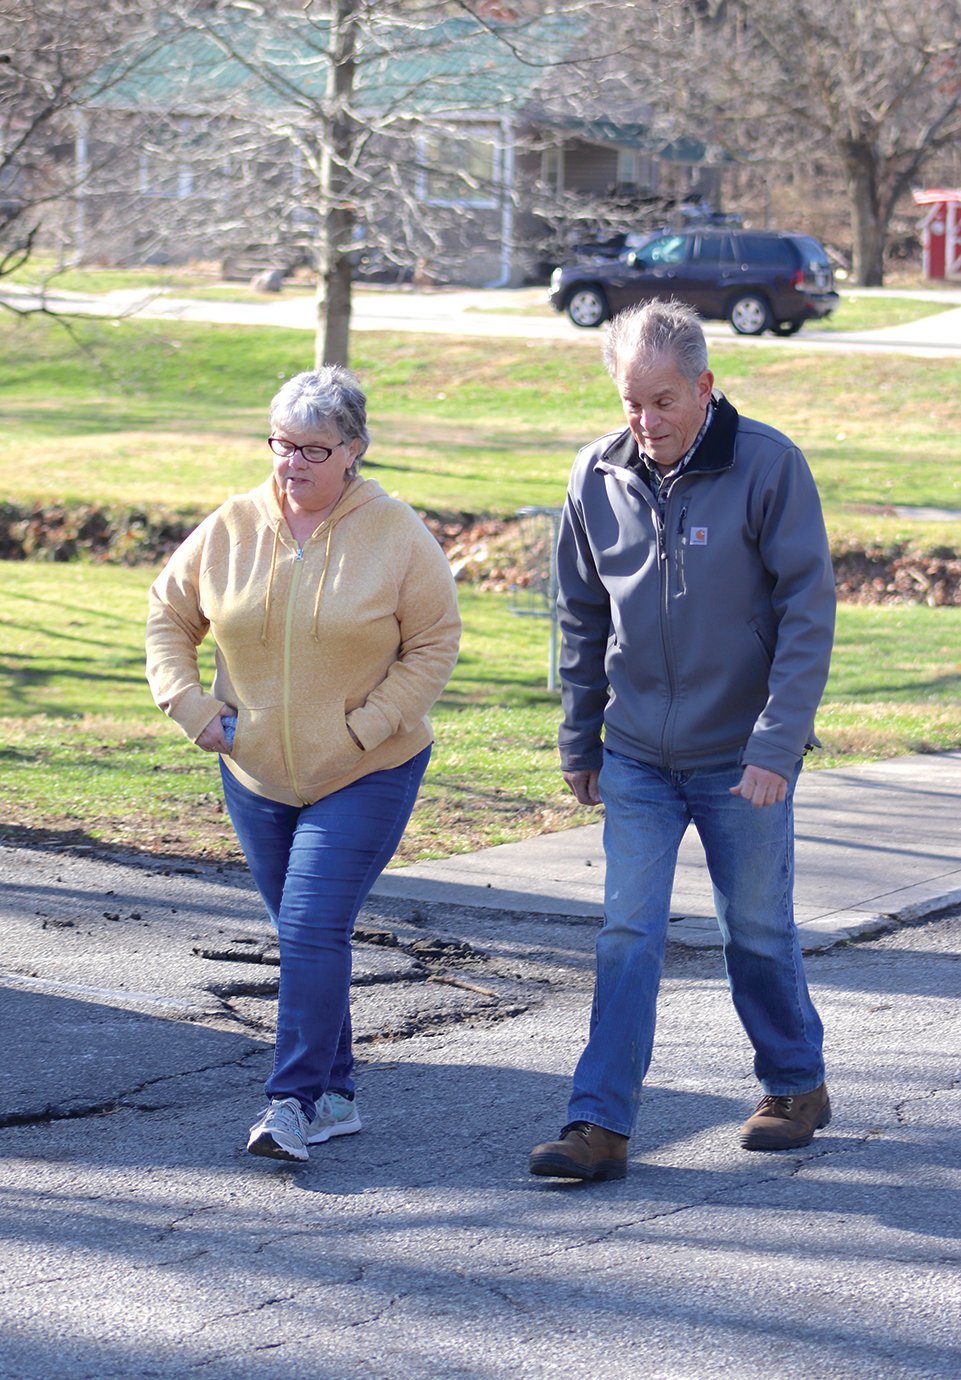 New Market's Ed Foerster pairs up with Crawfordsville resident Debbie Brown Tuesday afternoon near the Mill Street entrance to Milligan Park.